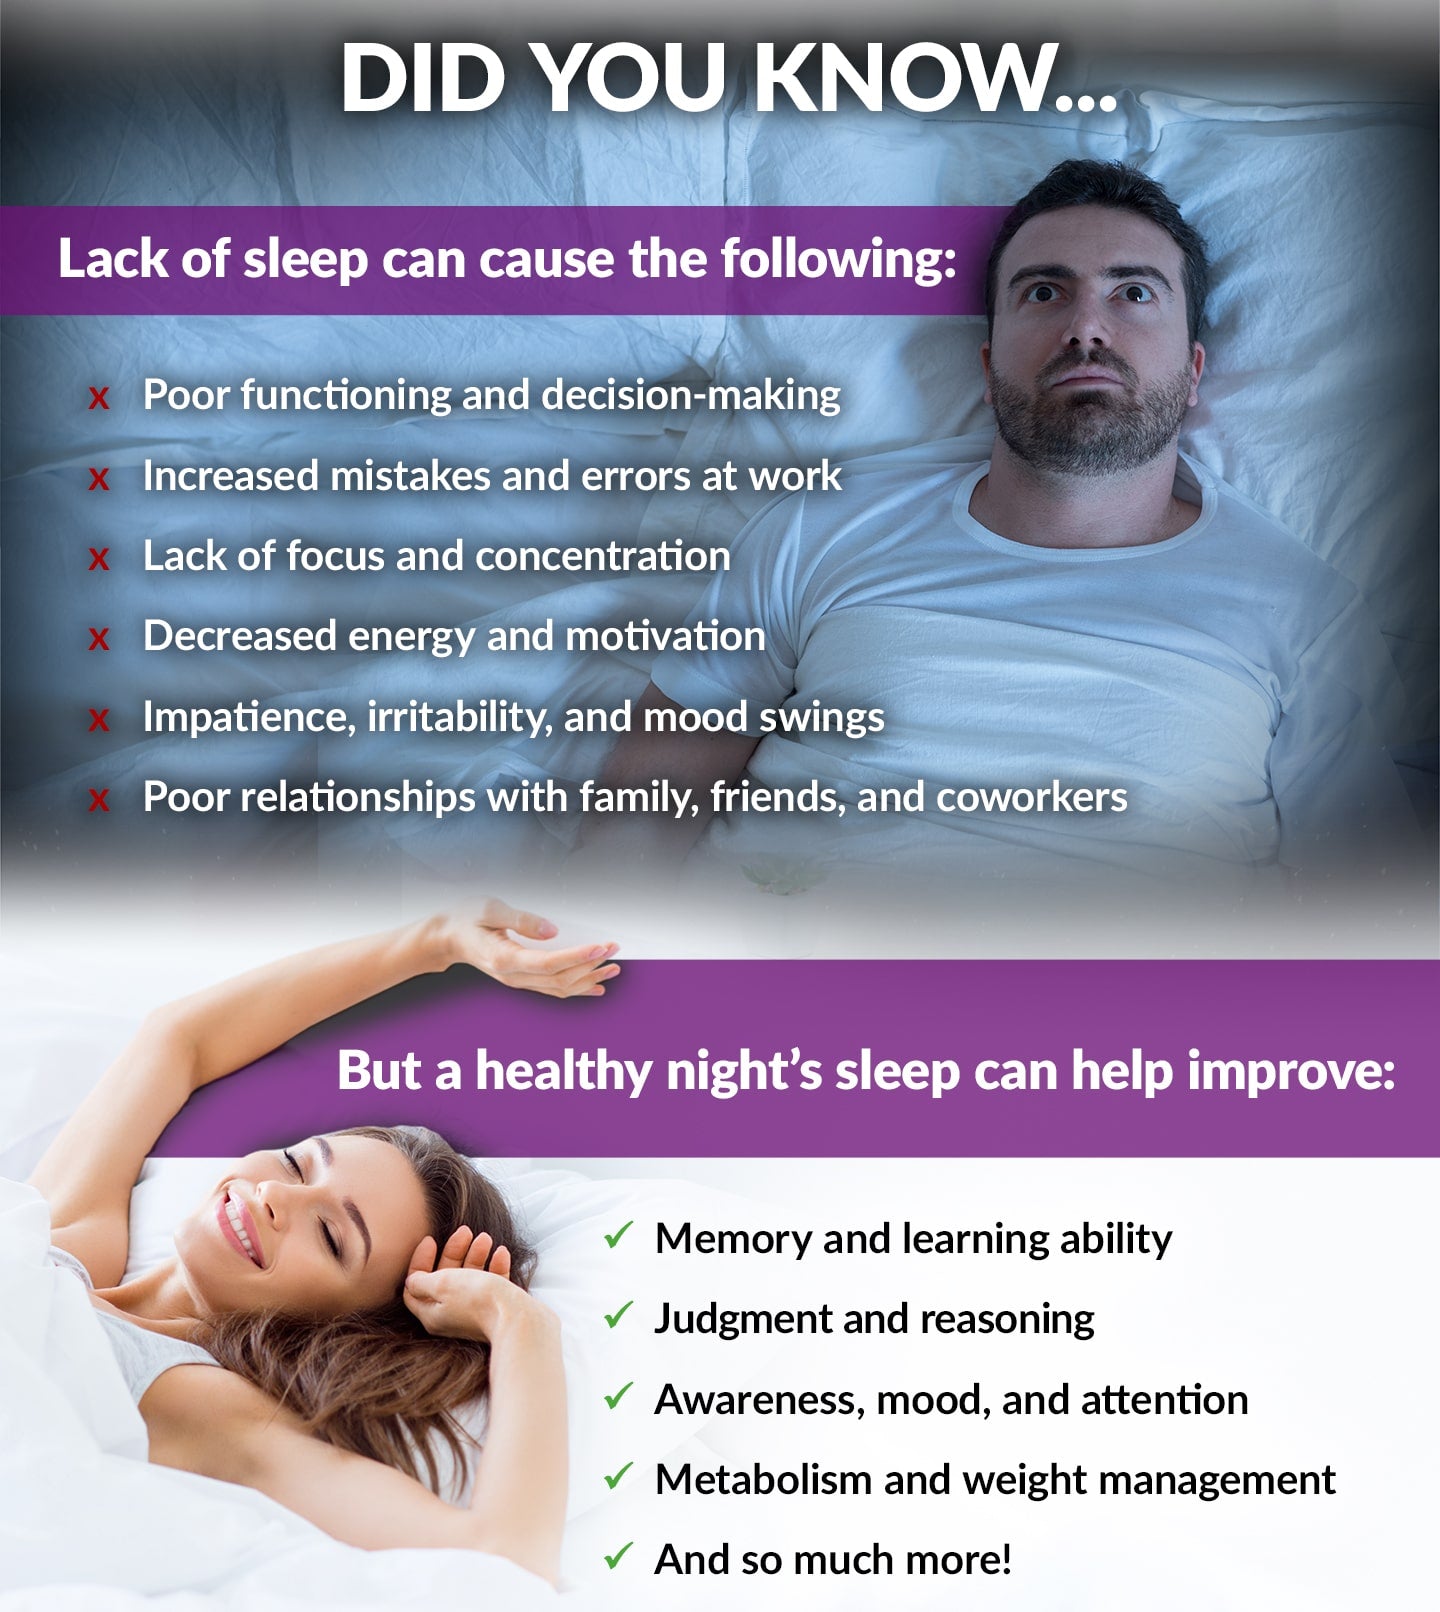 DID YOU KNOW... Lack of sleep can cause the following: Poor functioning and decision-making, Increased mistakes and errors at work, Lack of focus and concentration, Decreased energy and motivation, Impatience, irritability, and mood swings, Poor relationships with family, friends, and coworkers. But a healthy night’s sleep can help improve: Memory and learning ability, Judgment and reasoning, Awareness, mood, and attention, Metabolism and weight management, And so much more!